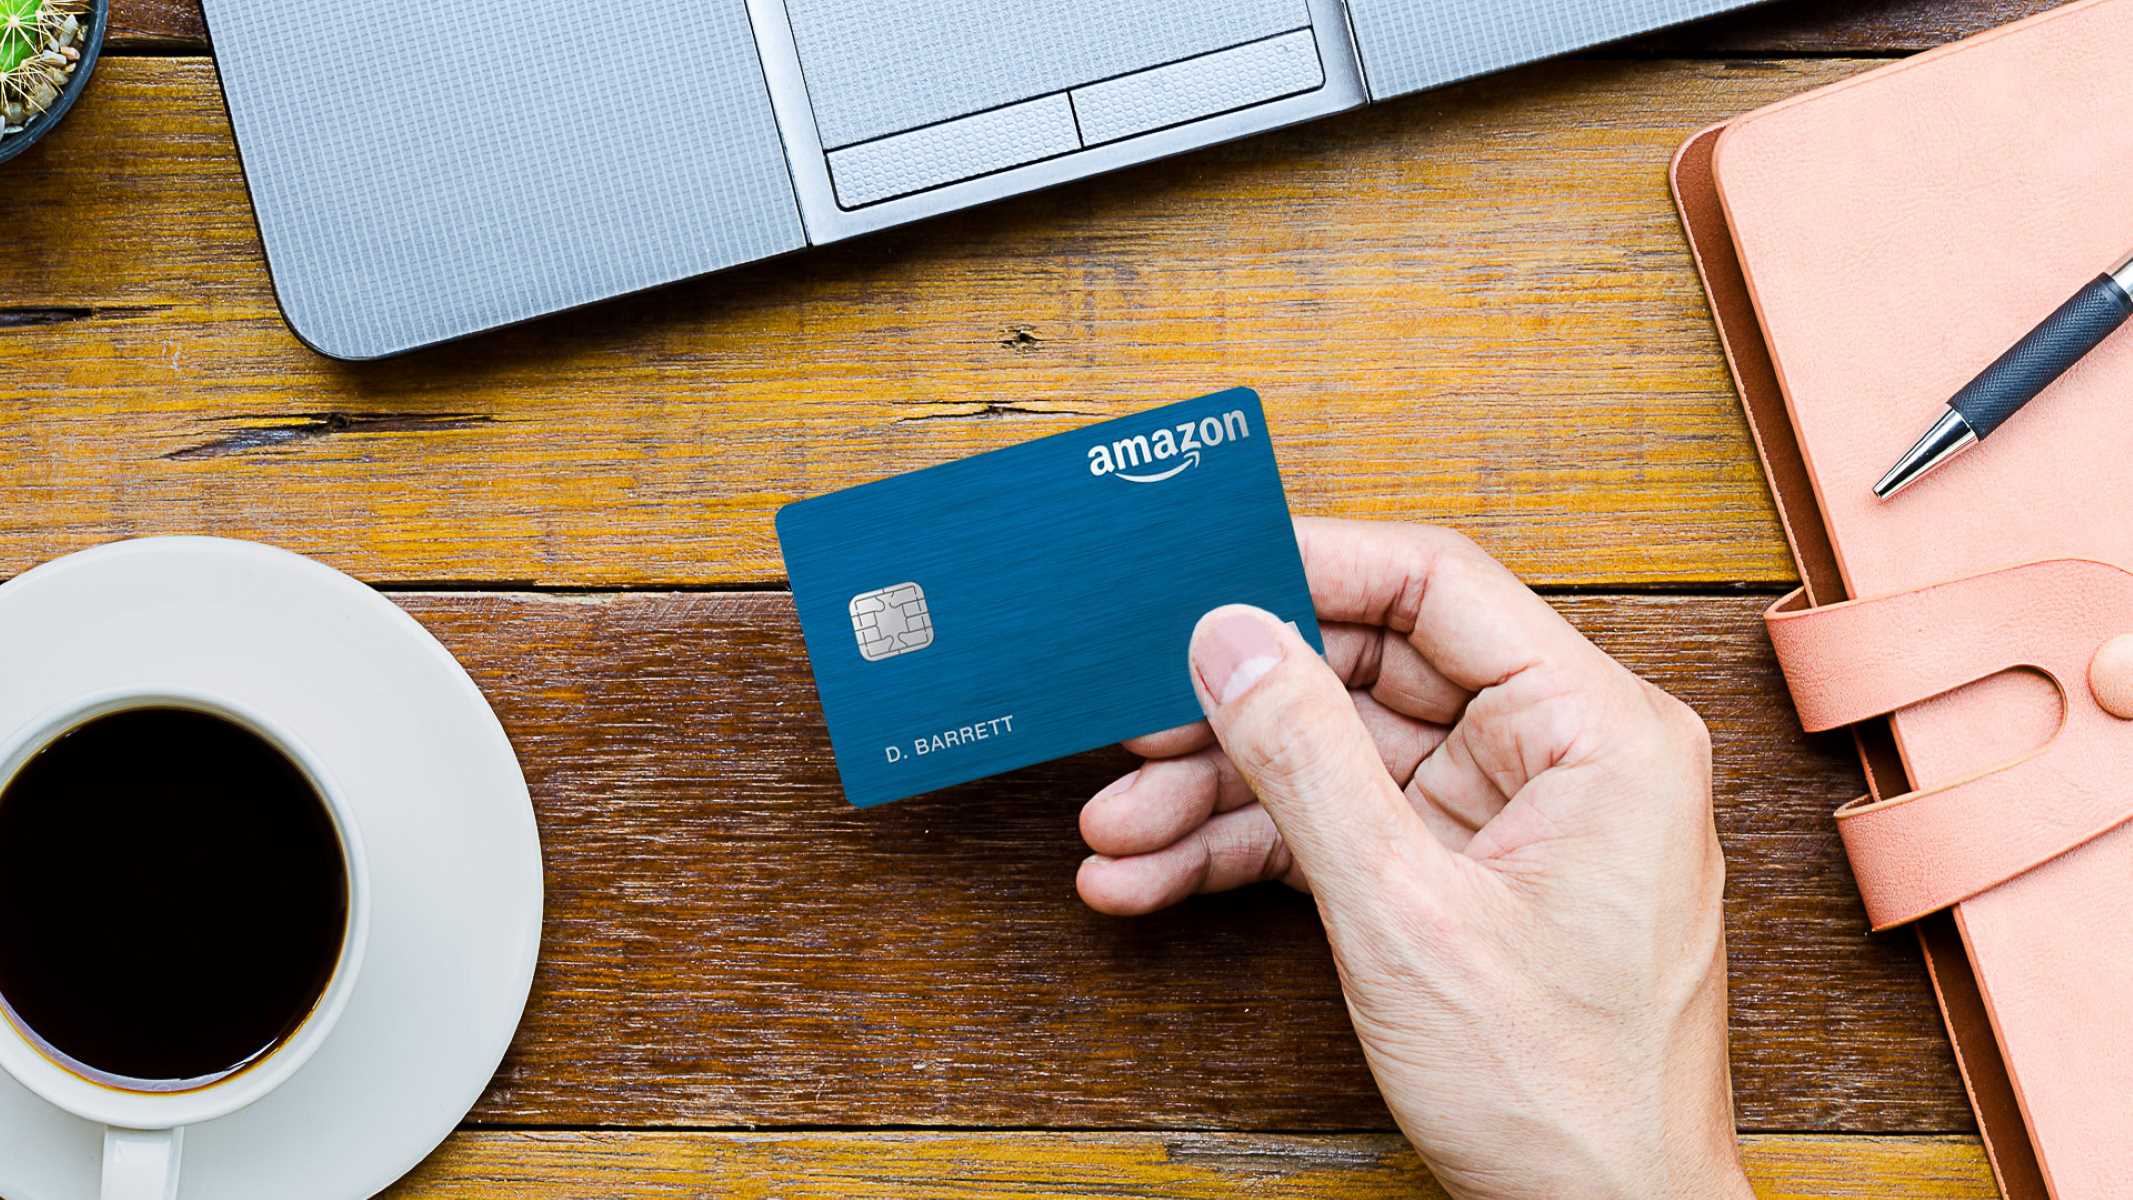 How To Find Amazon Credit Card Number